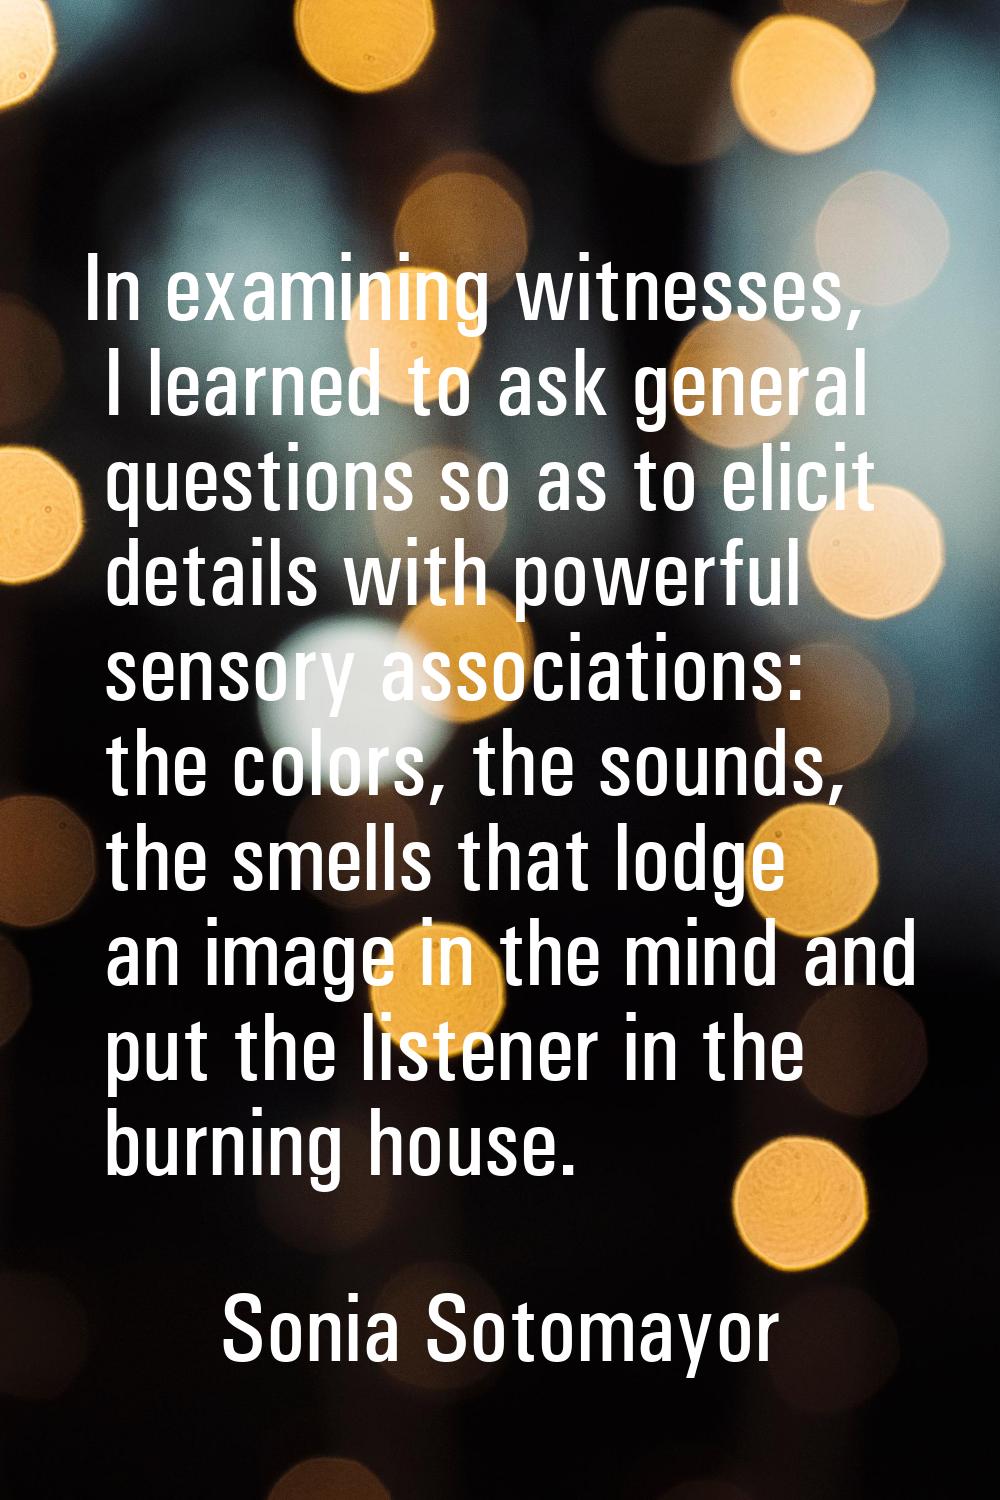 In examining witnesses, I learned to ask general questions so as to elicit details with powerful se